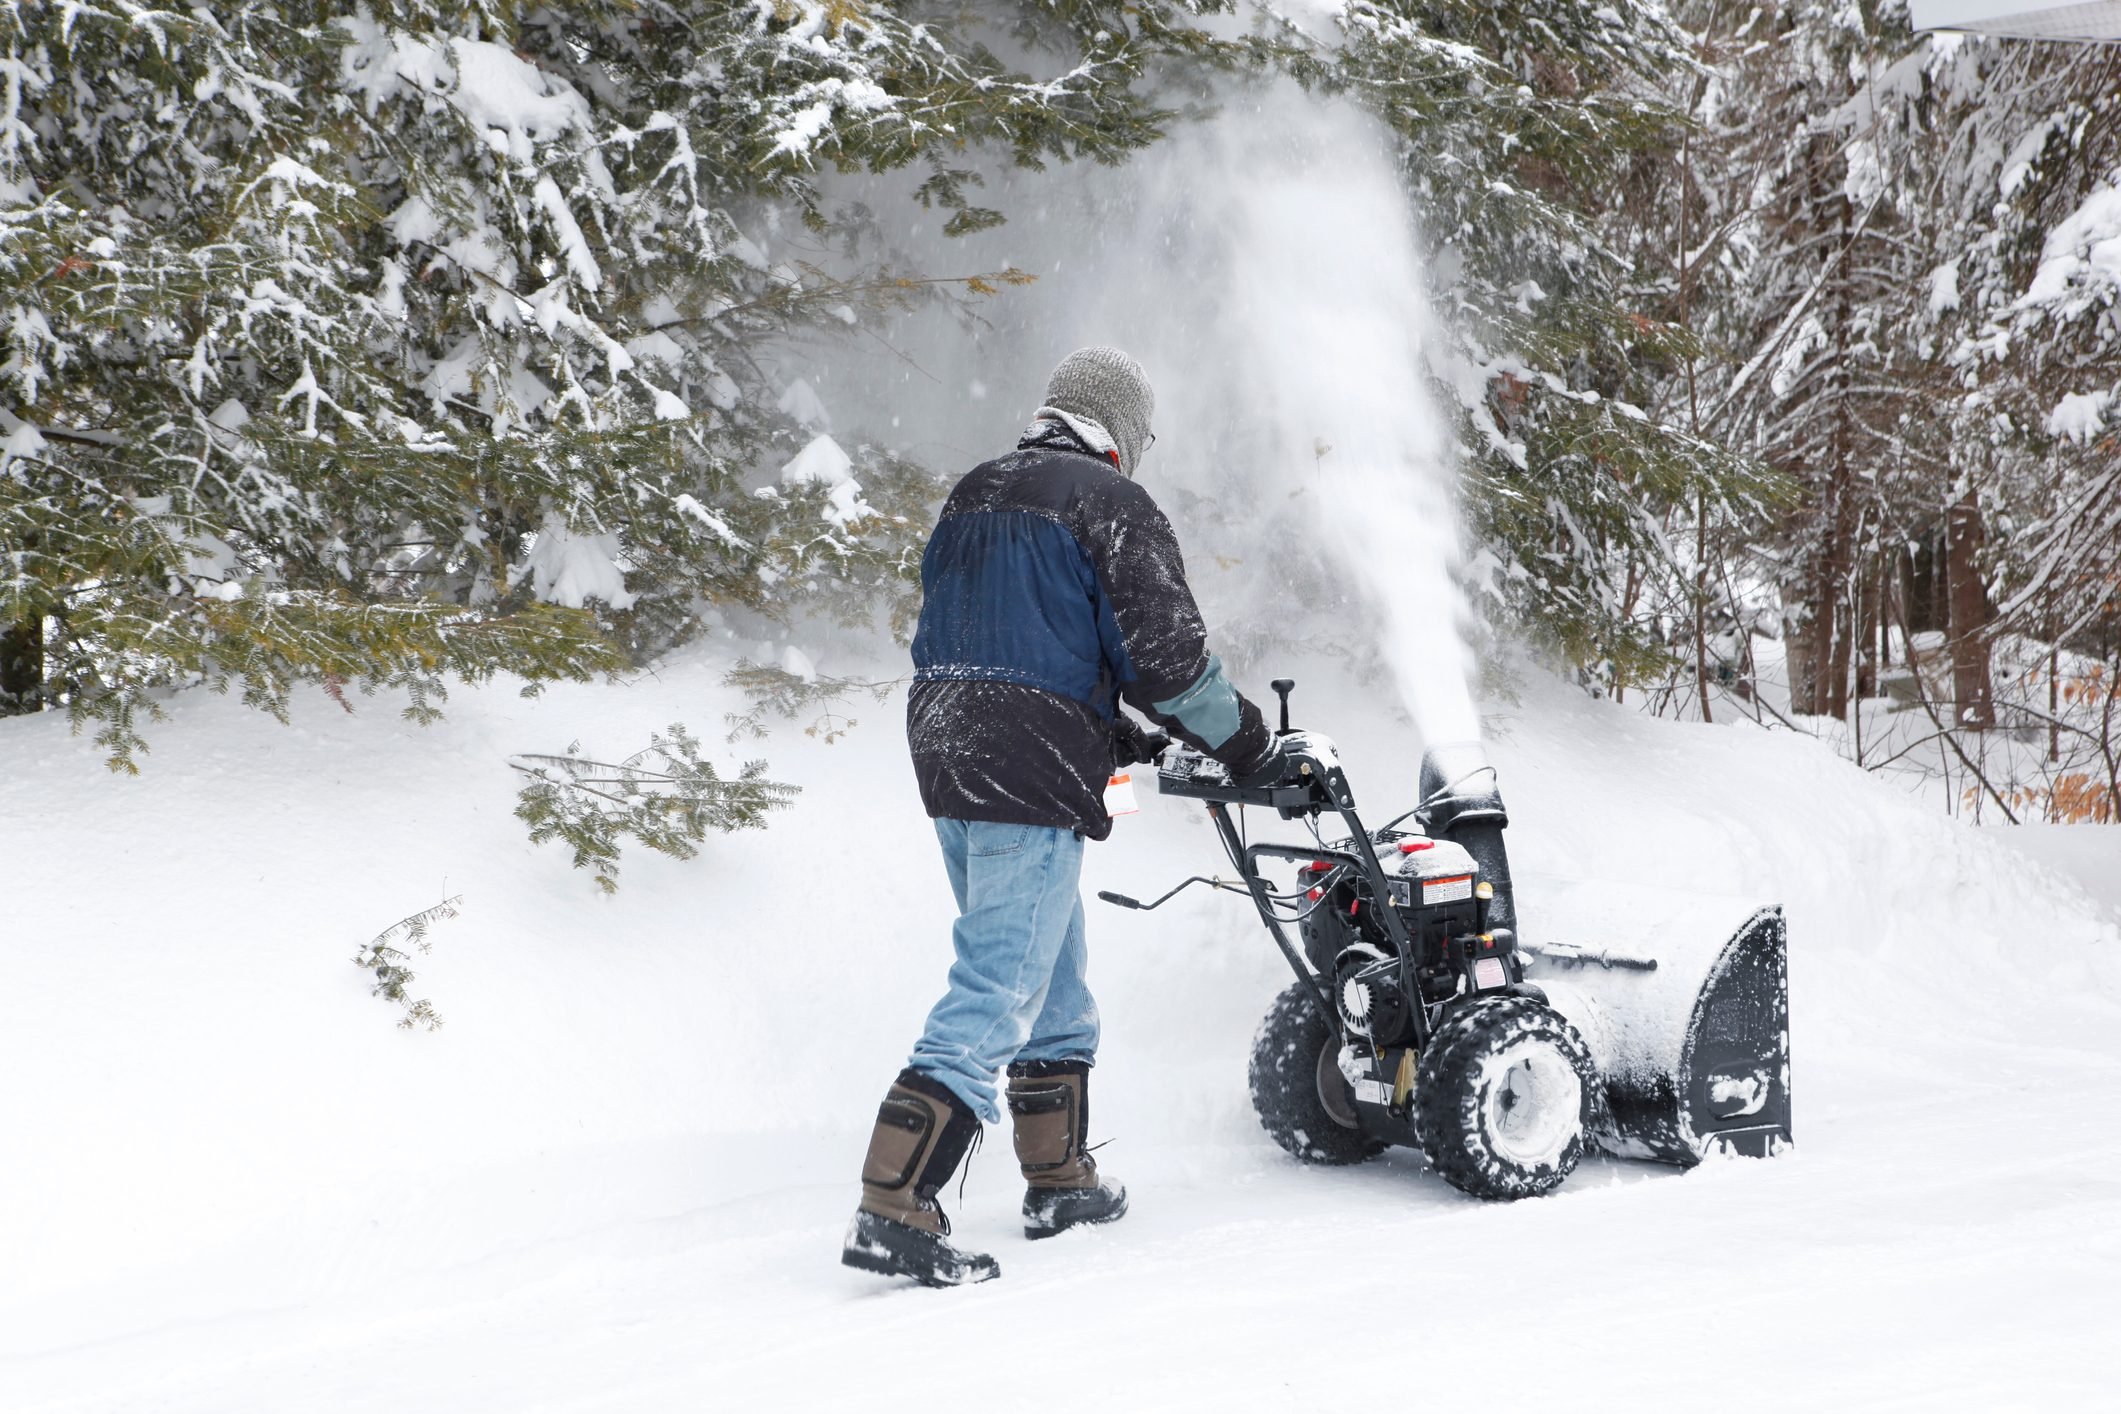 Can You Clear Snow From Your Car or Walkway with a LEAF BLOWER??